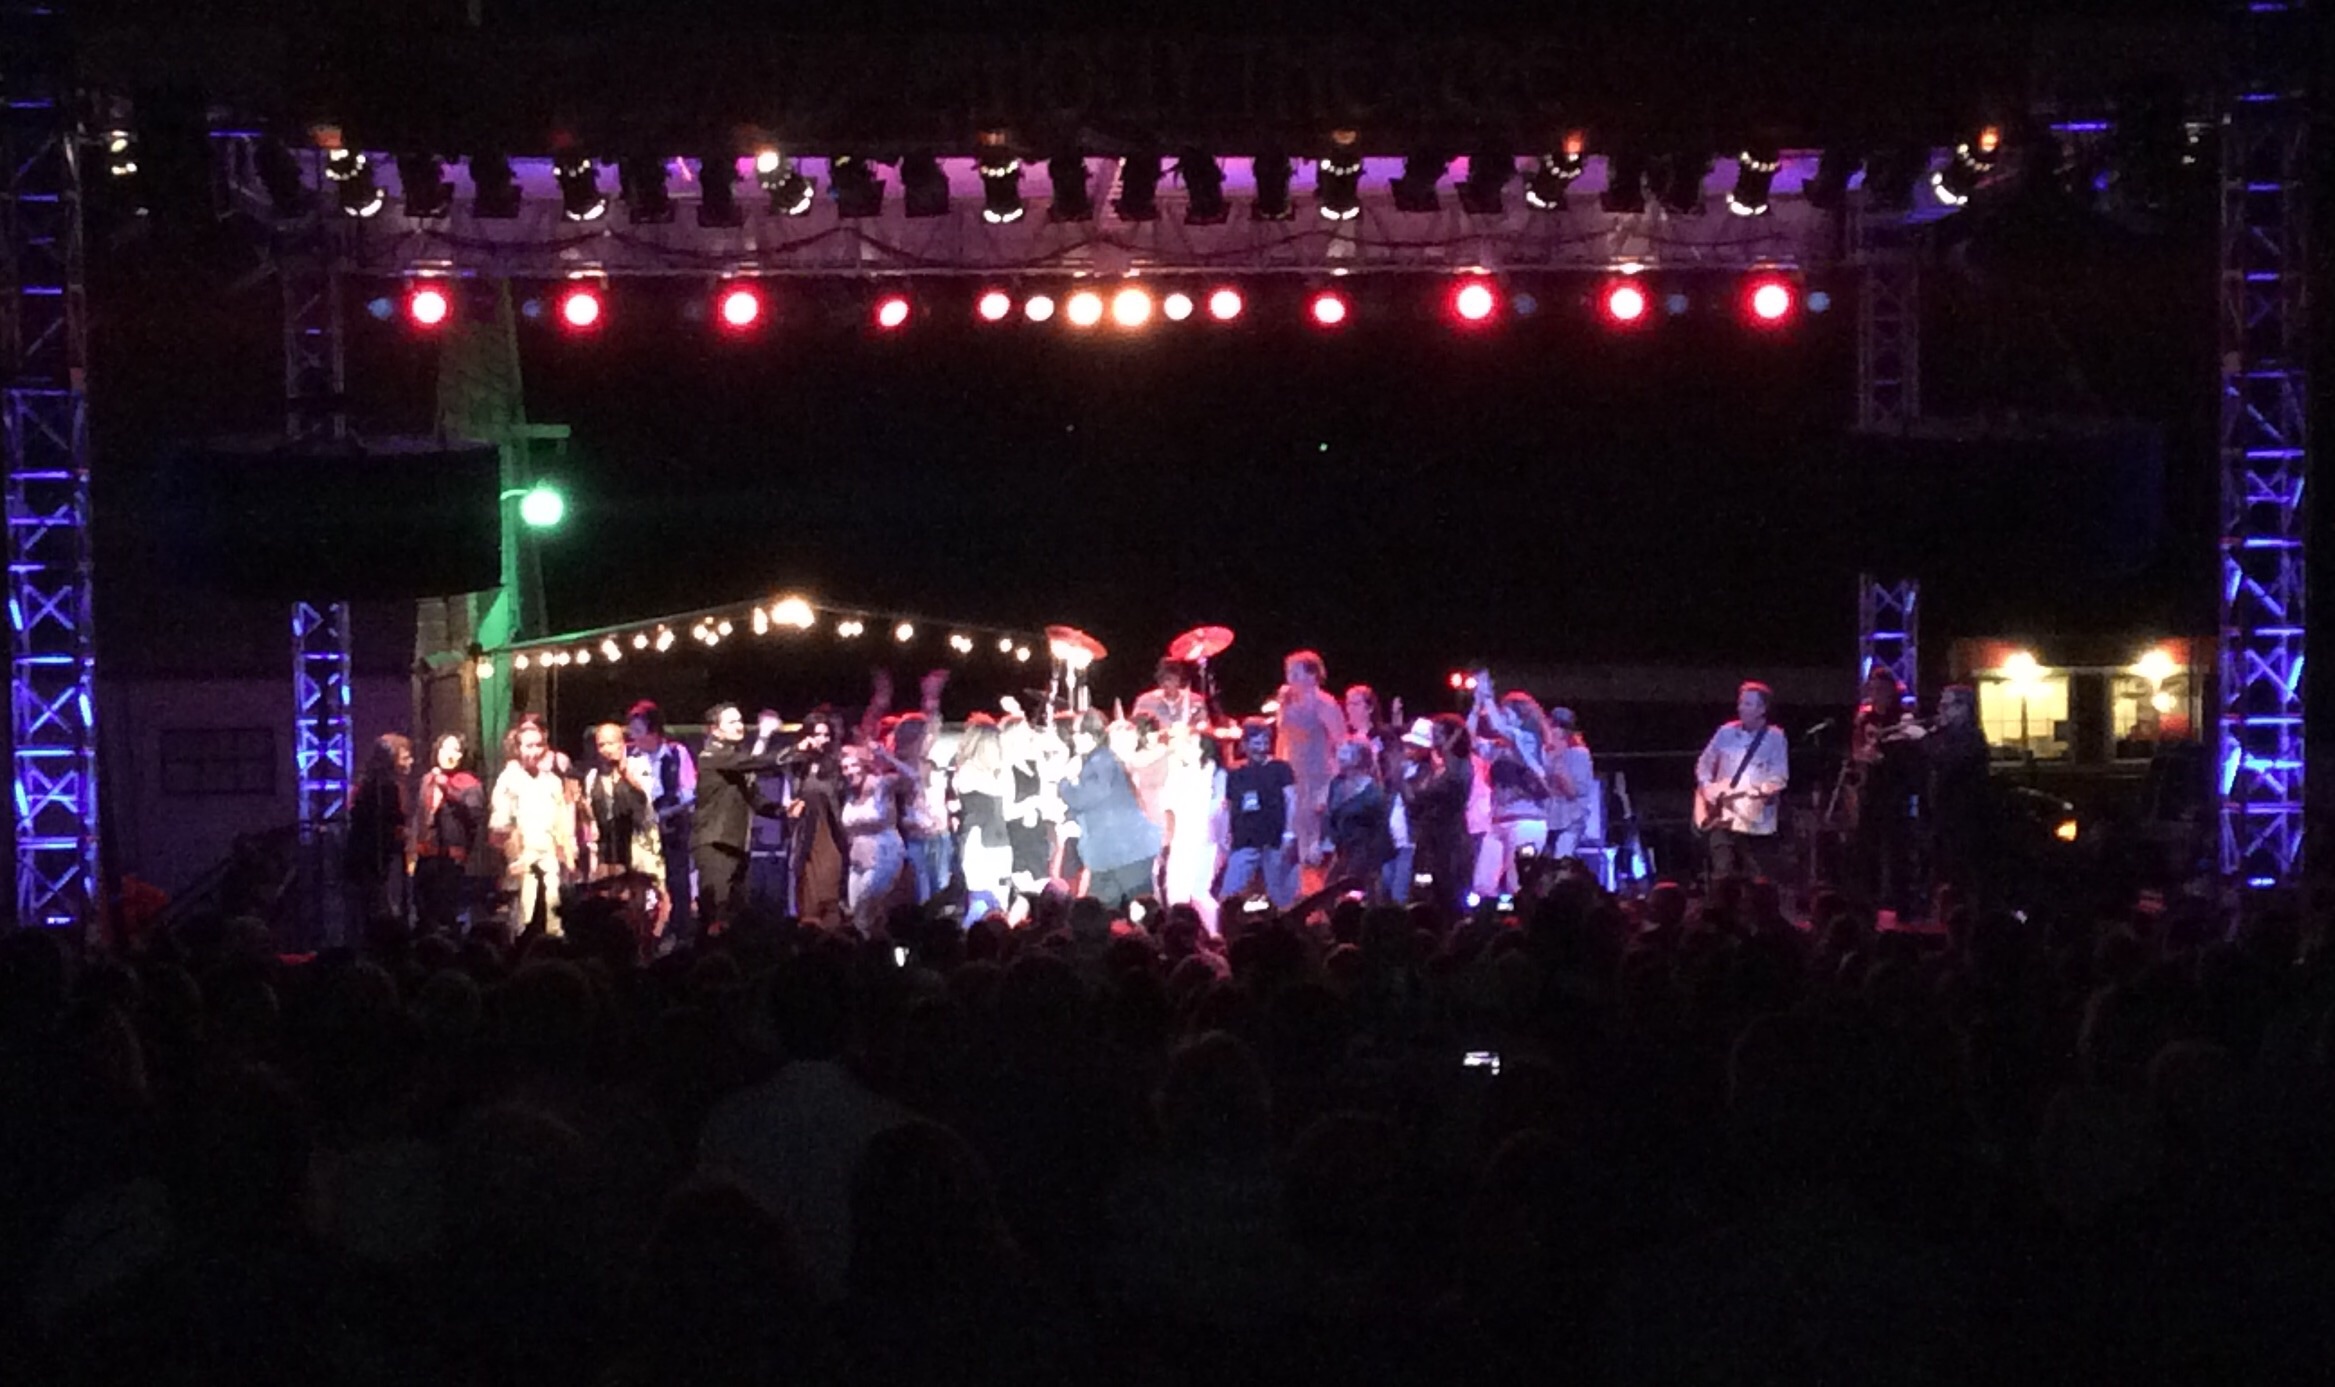 Jim Belushi has a party on stage!